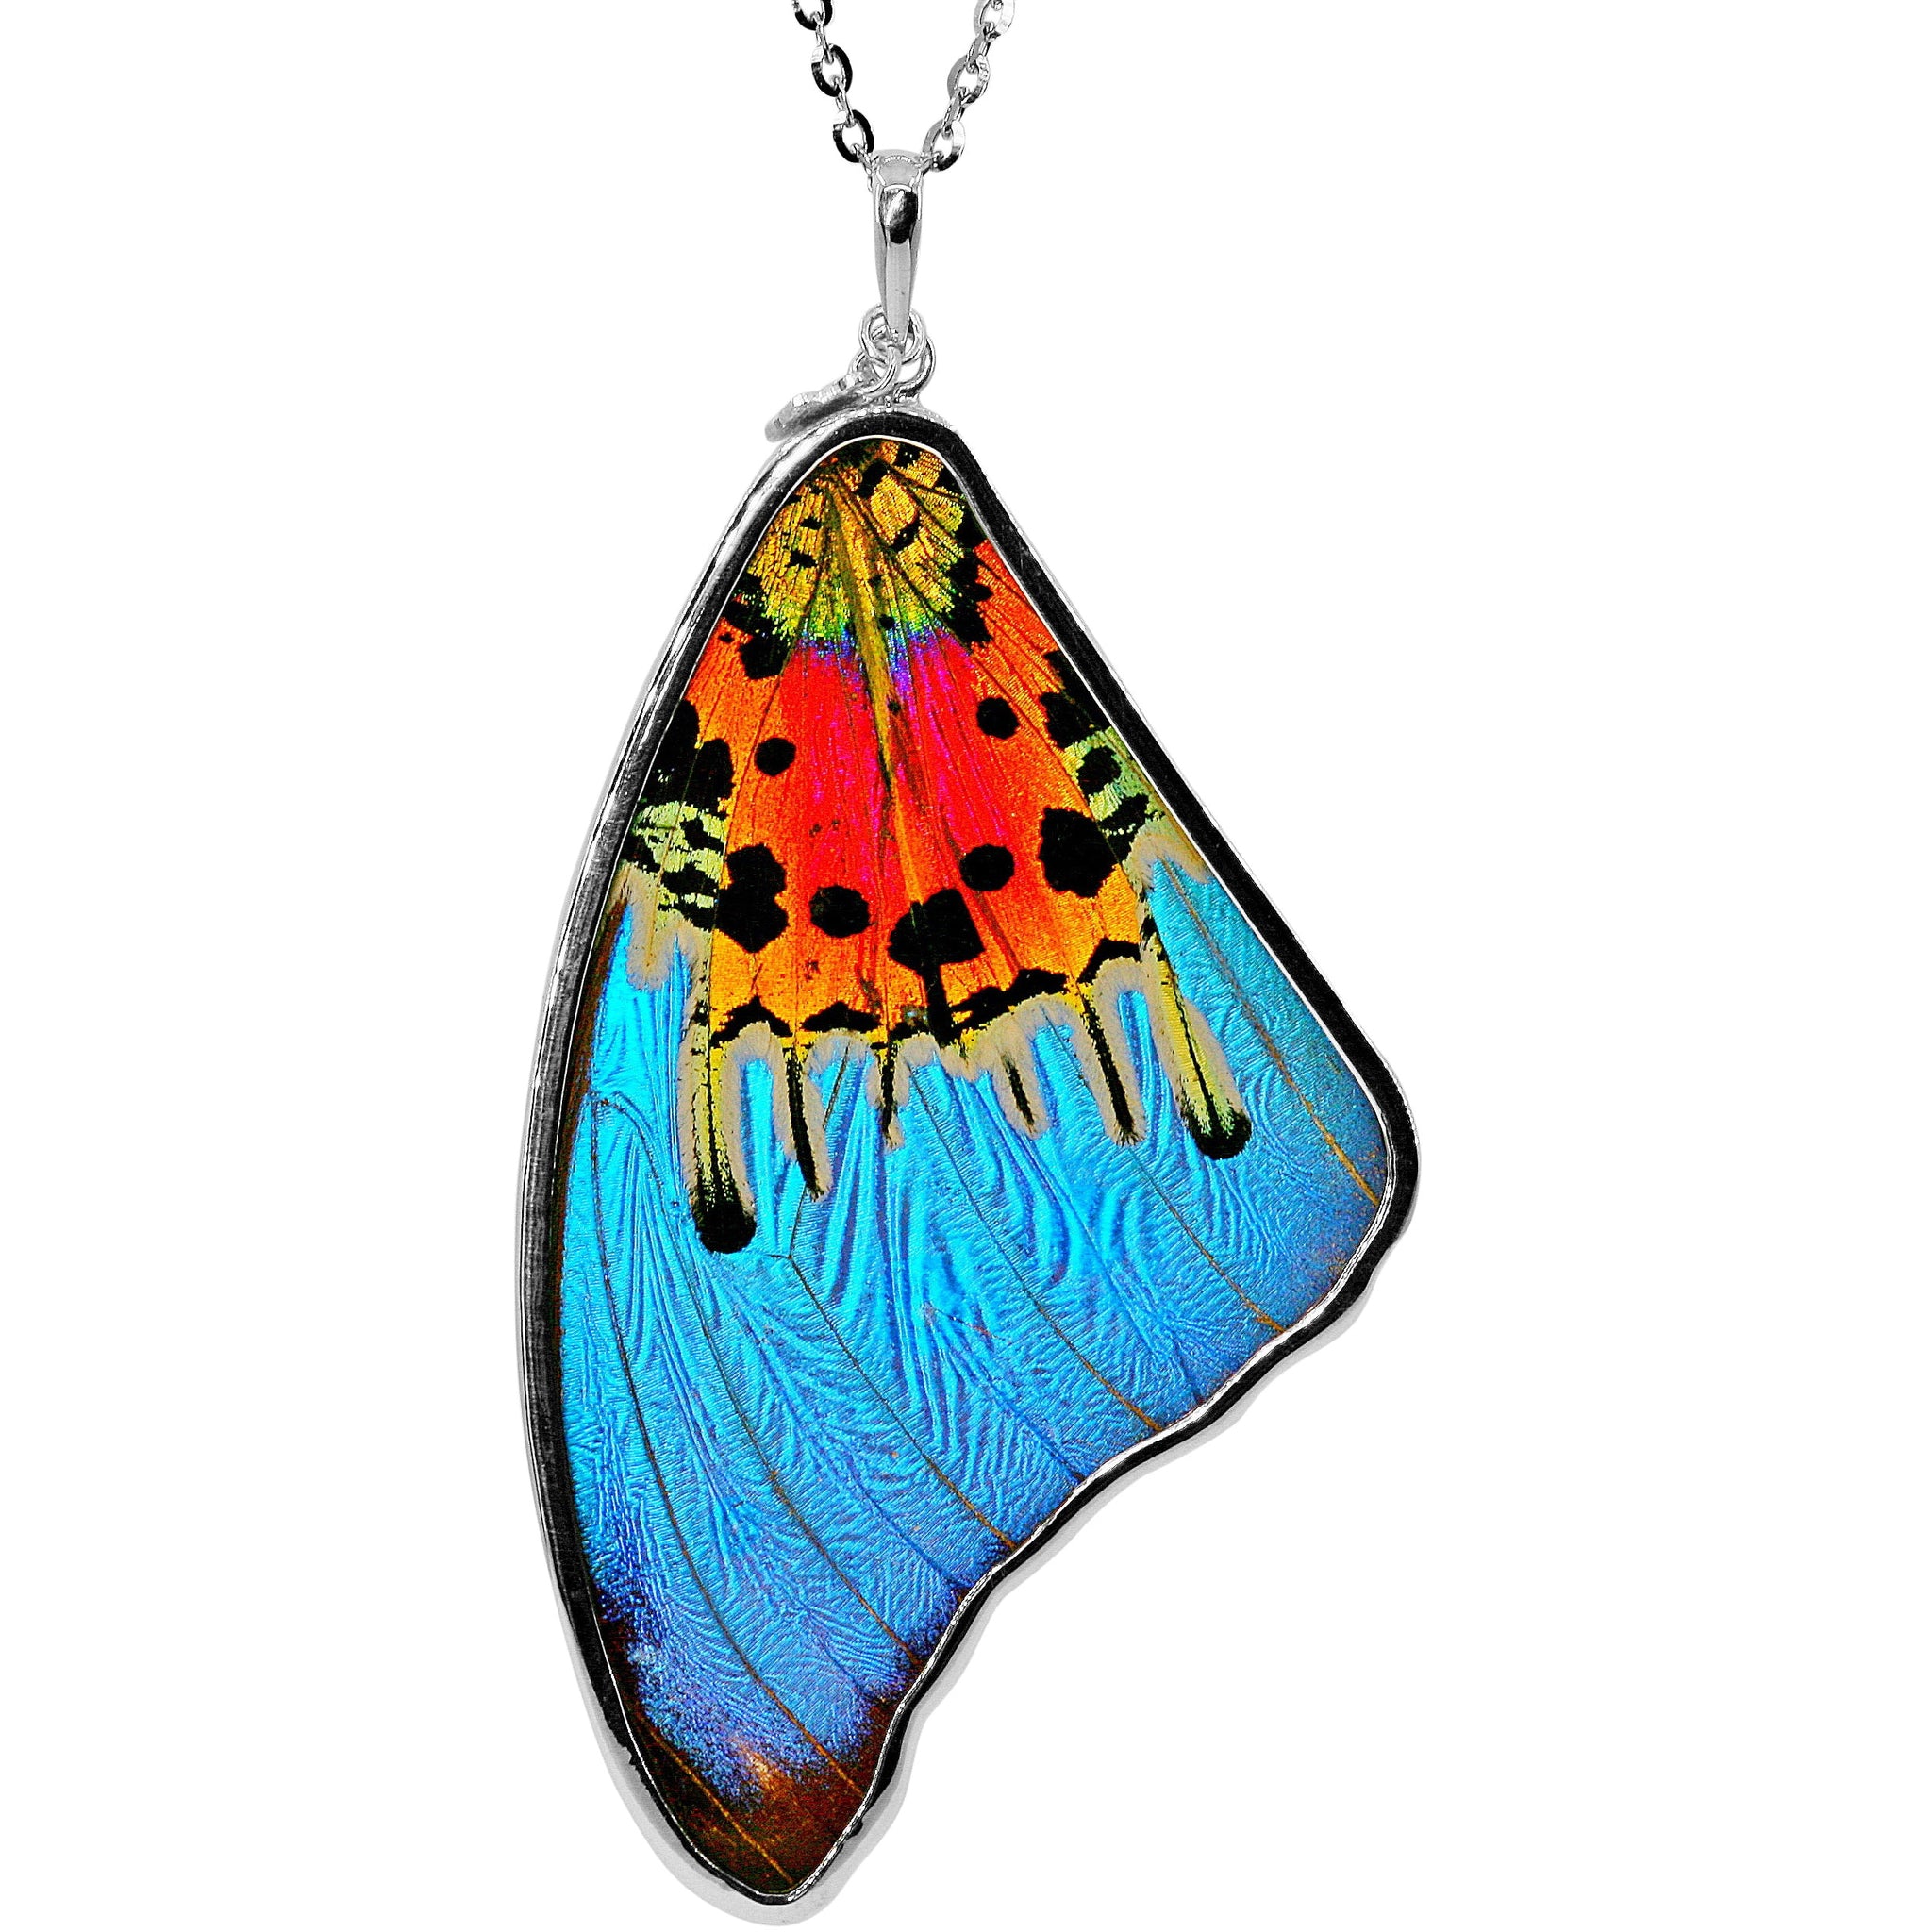 Morpho Ripheous B Large Butterfly Wing Necklace